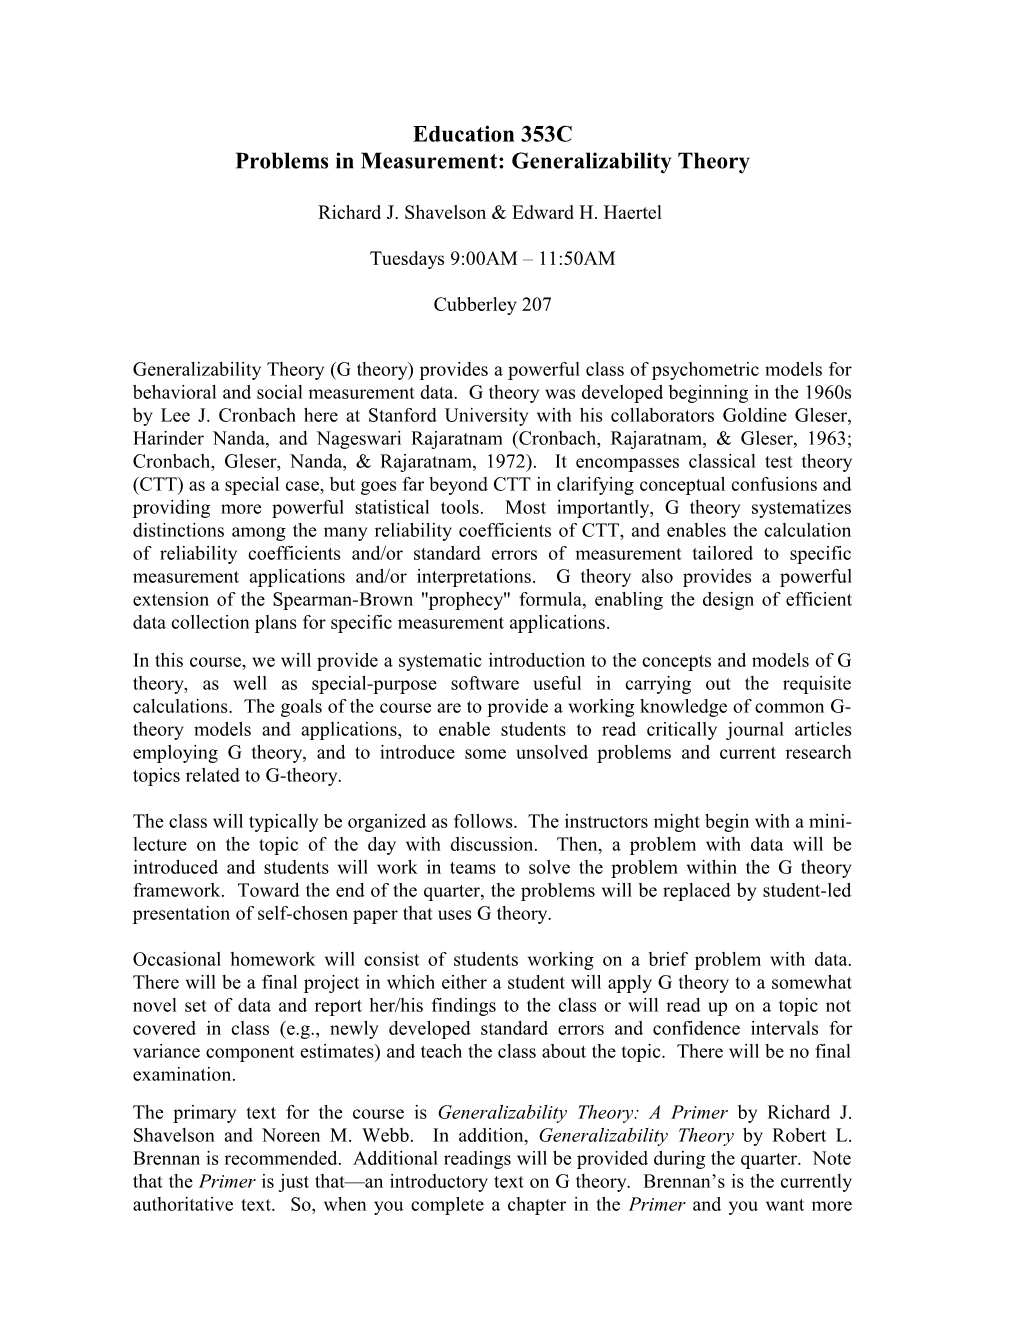 Problems in Measurement: Generalizability Theory